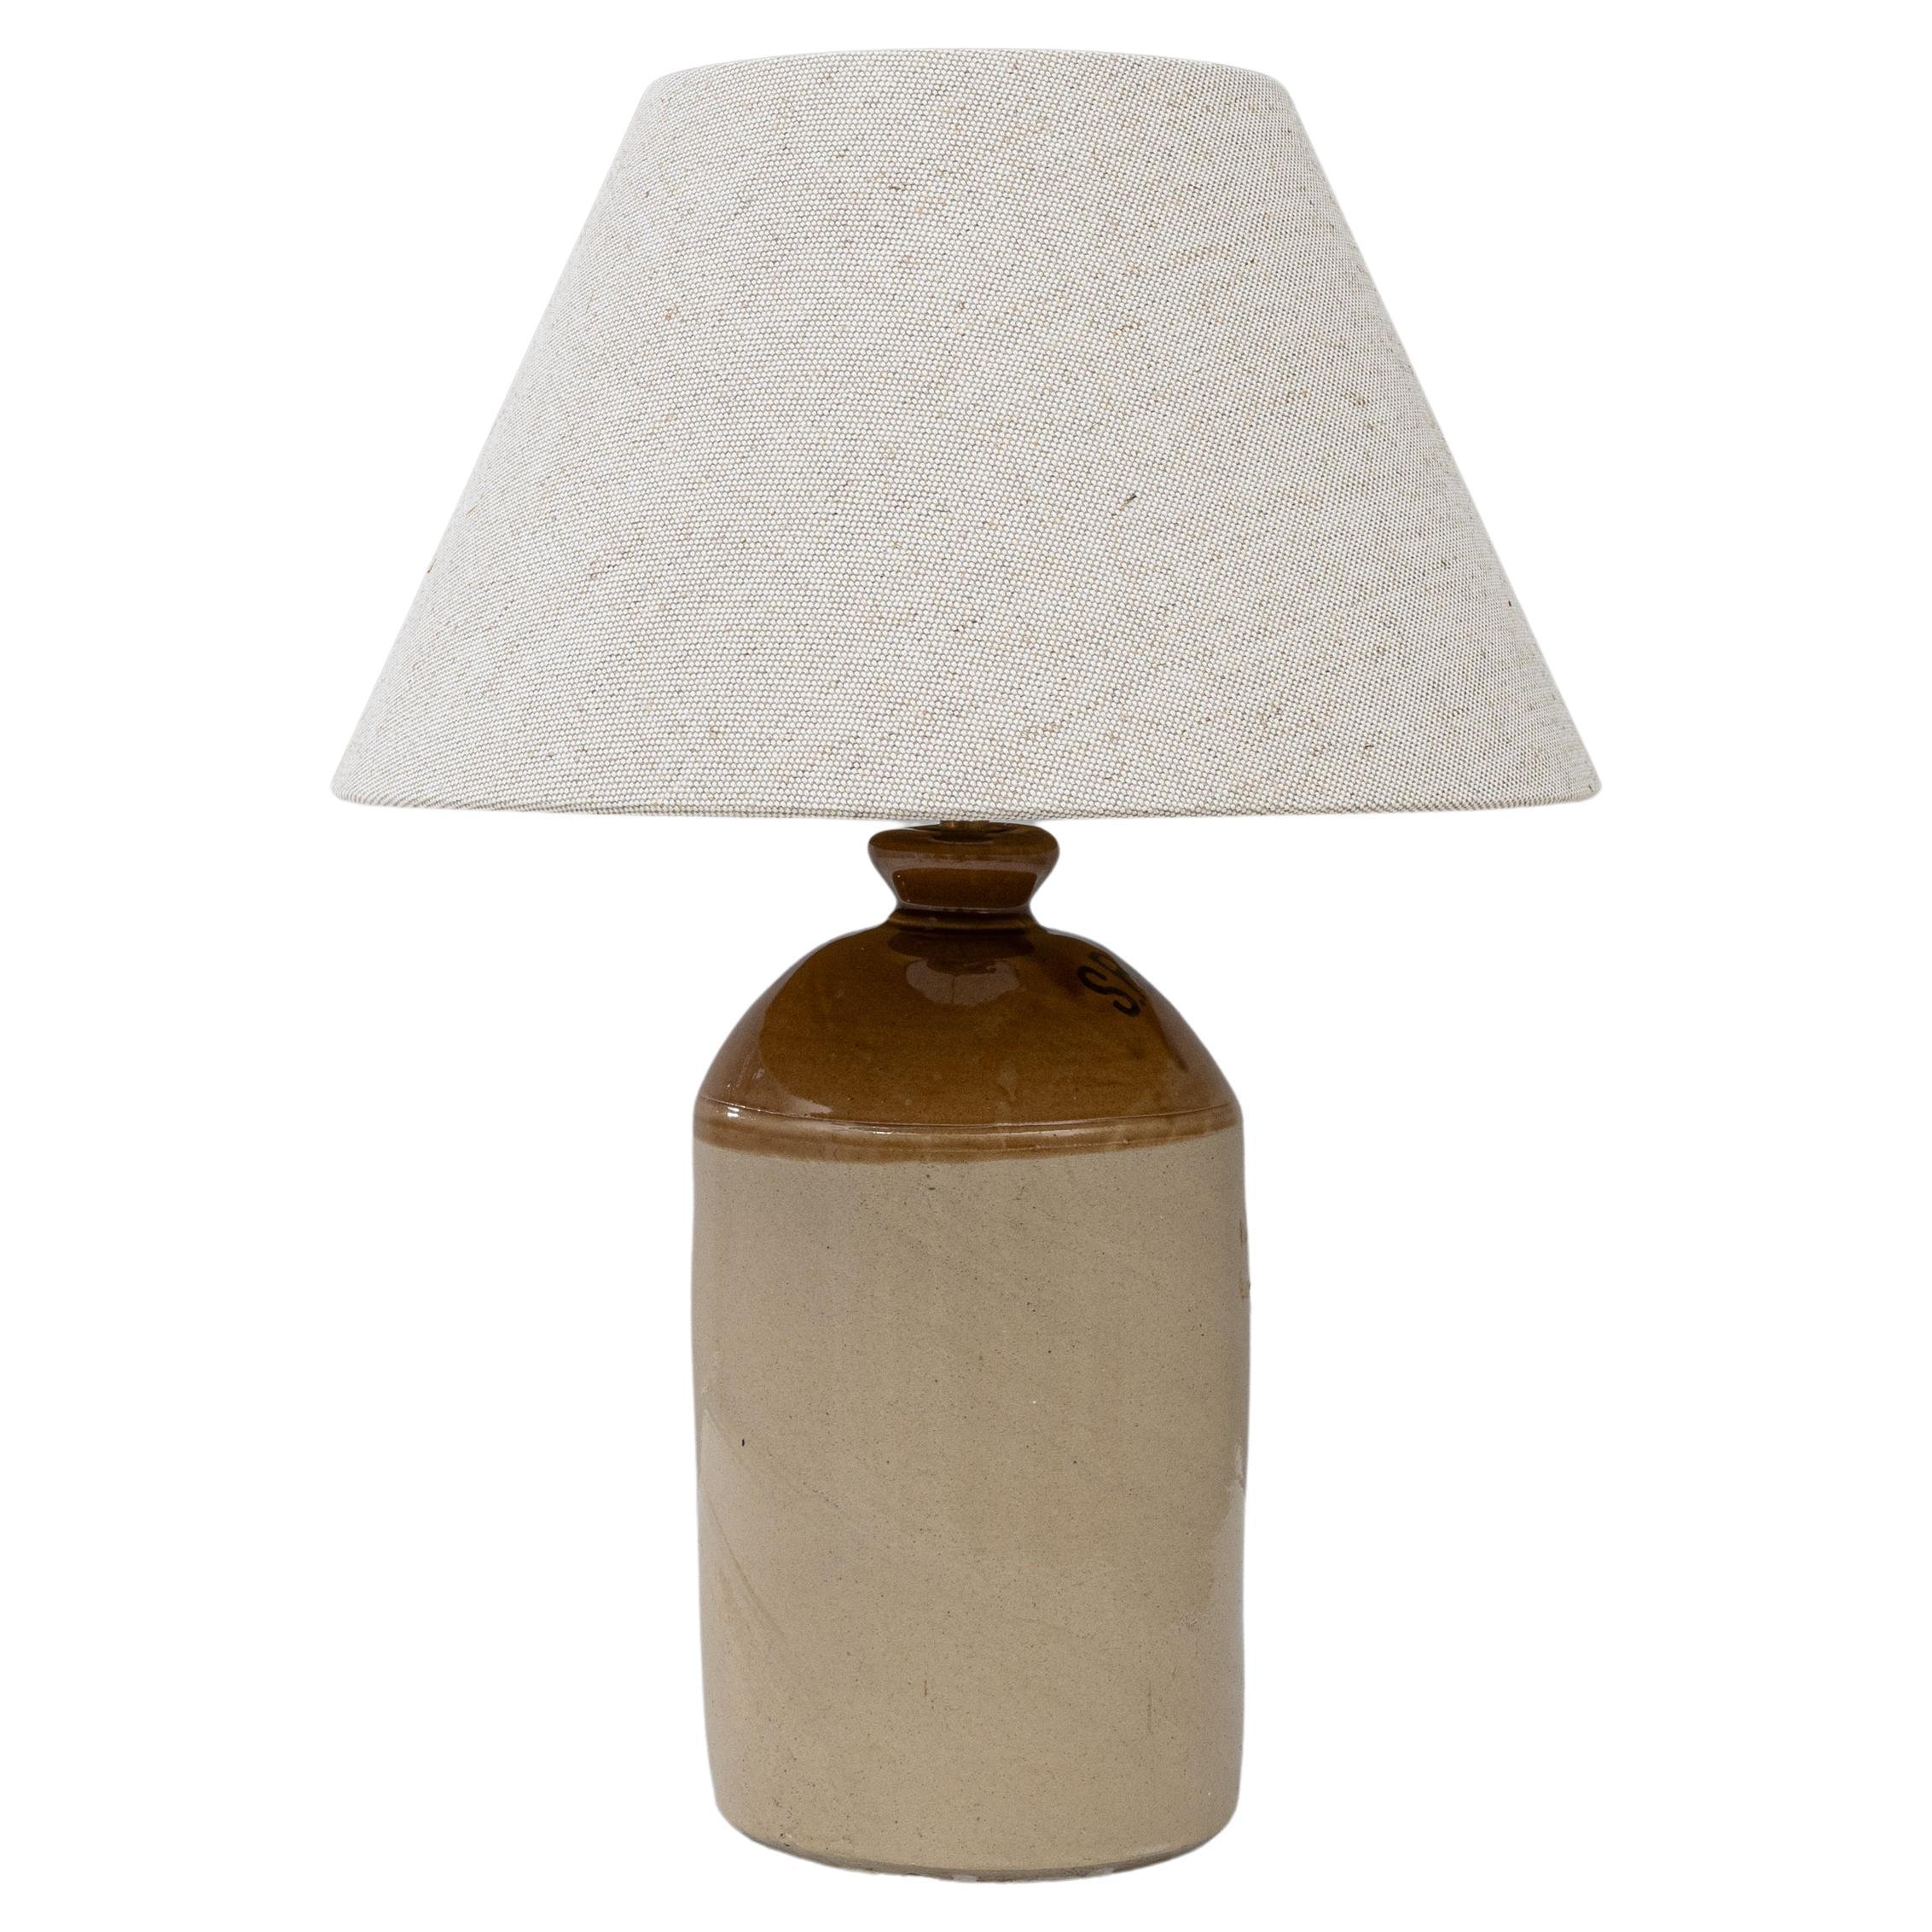 Early 20th Century British Ceramic Table Lamp For Sale